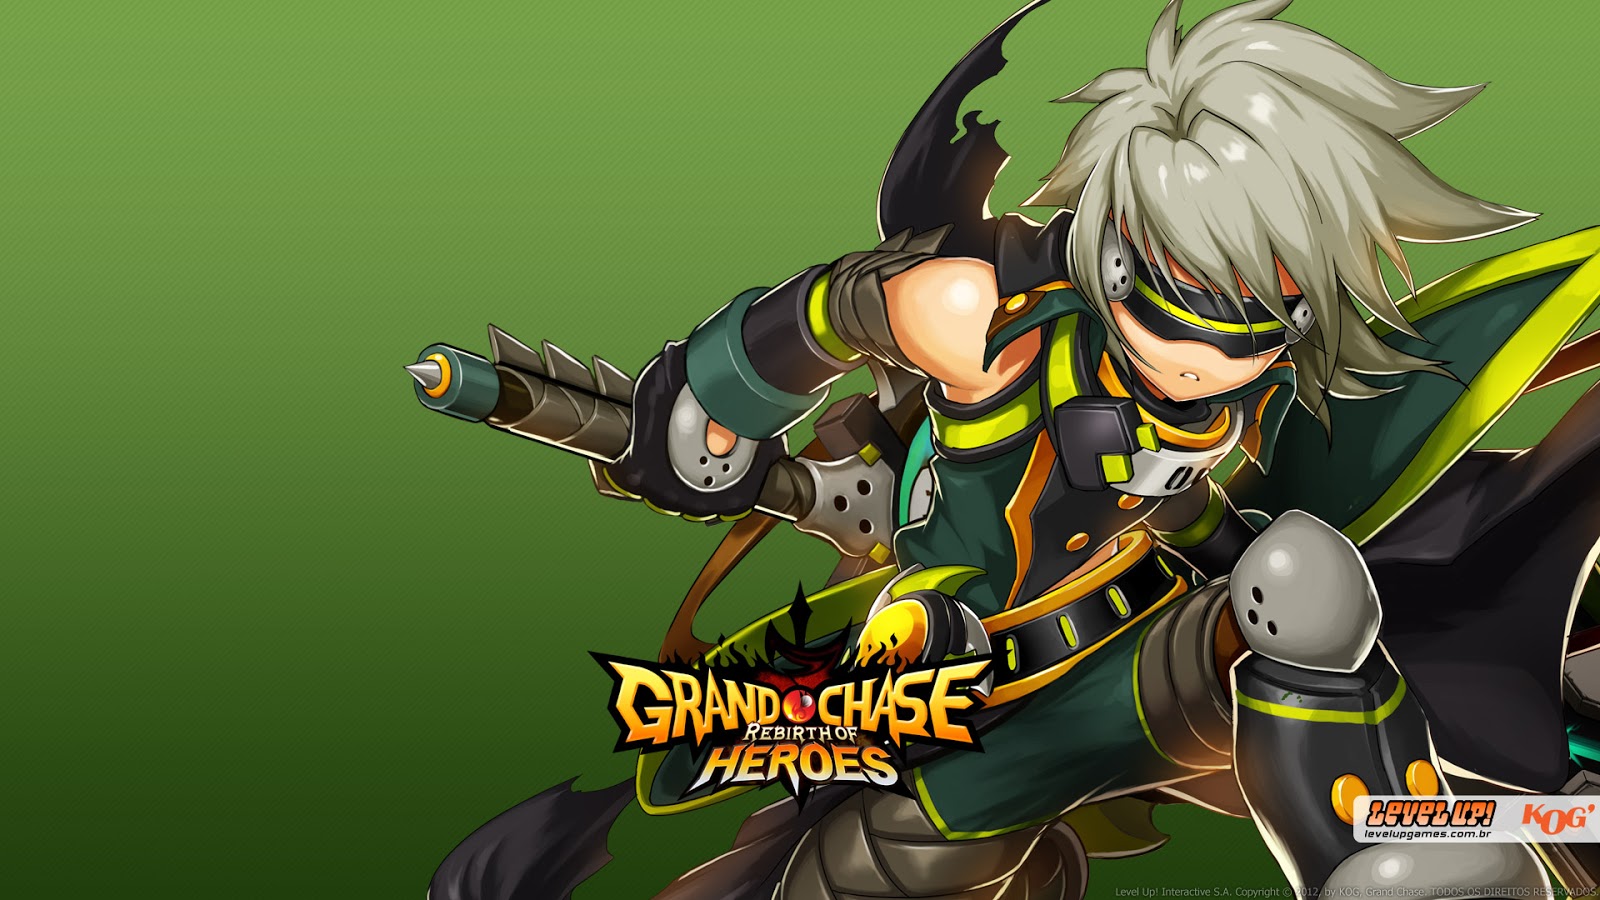 Grand Chase Wallpapers